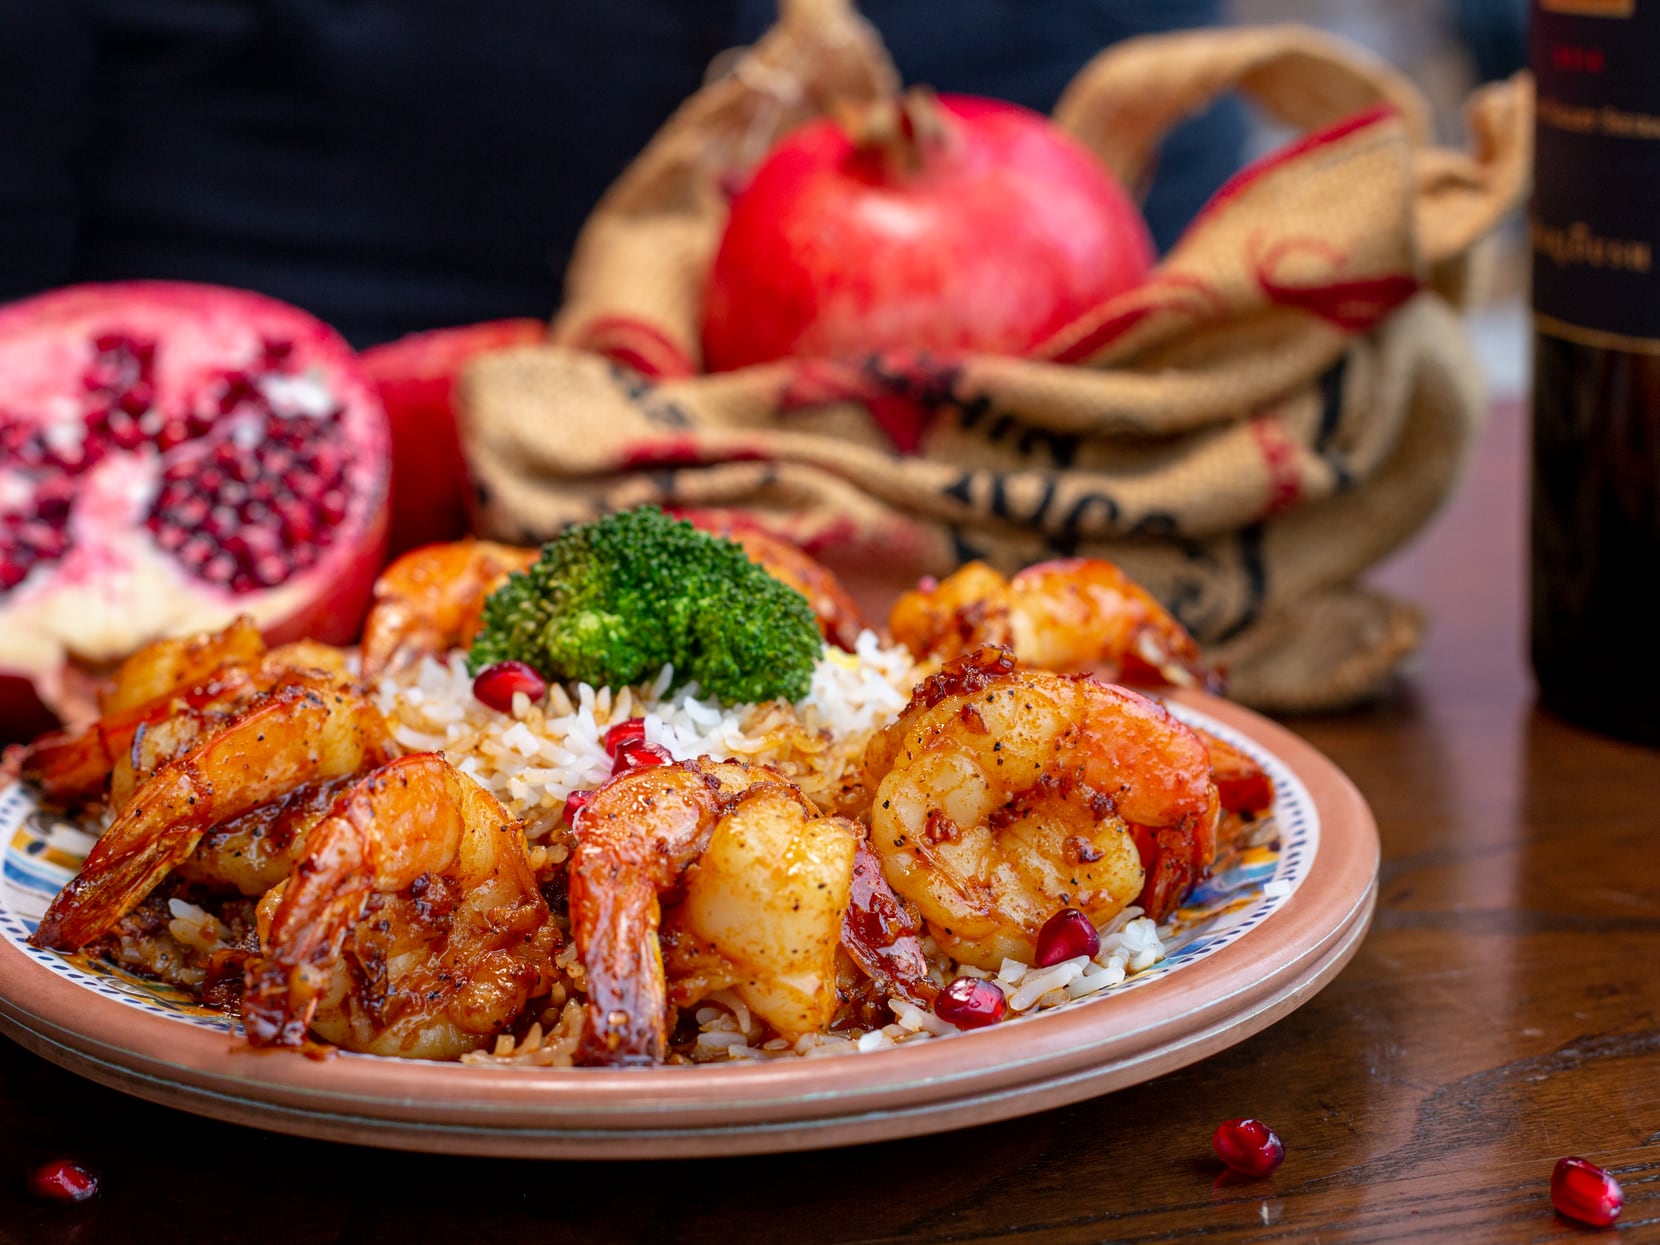 The Pomegranate Shrimp is a favorite at Cafe Izmir in Dallas.